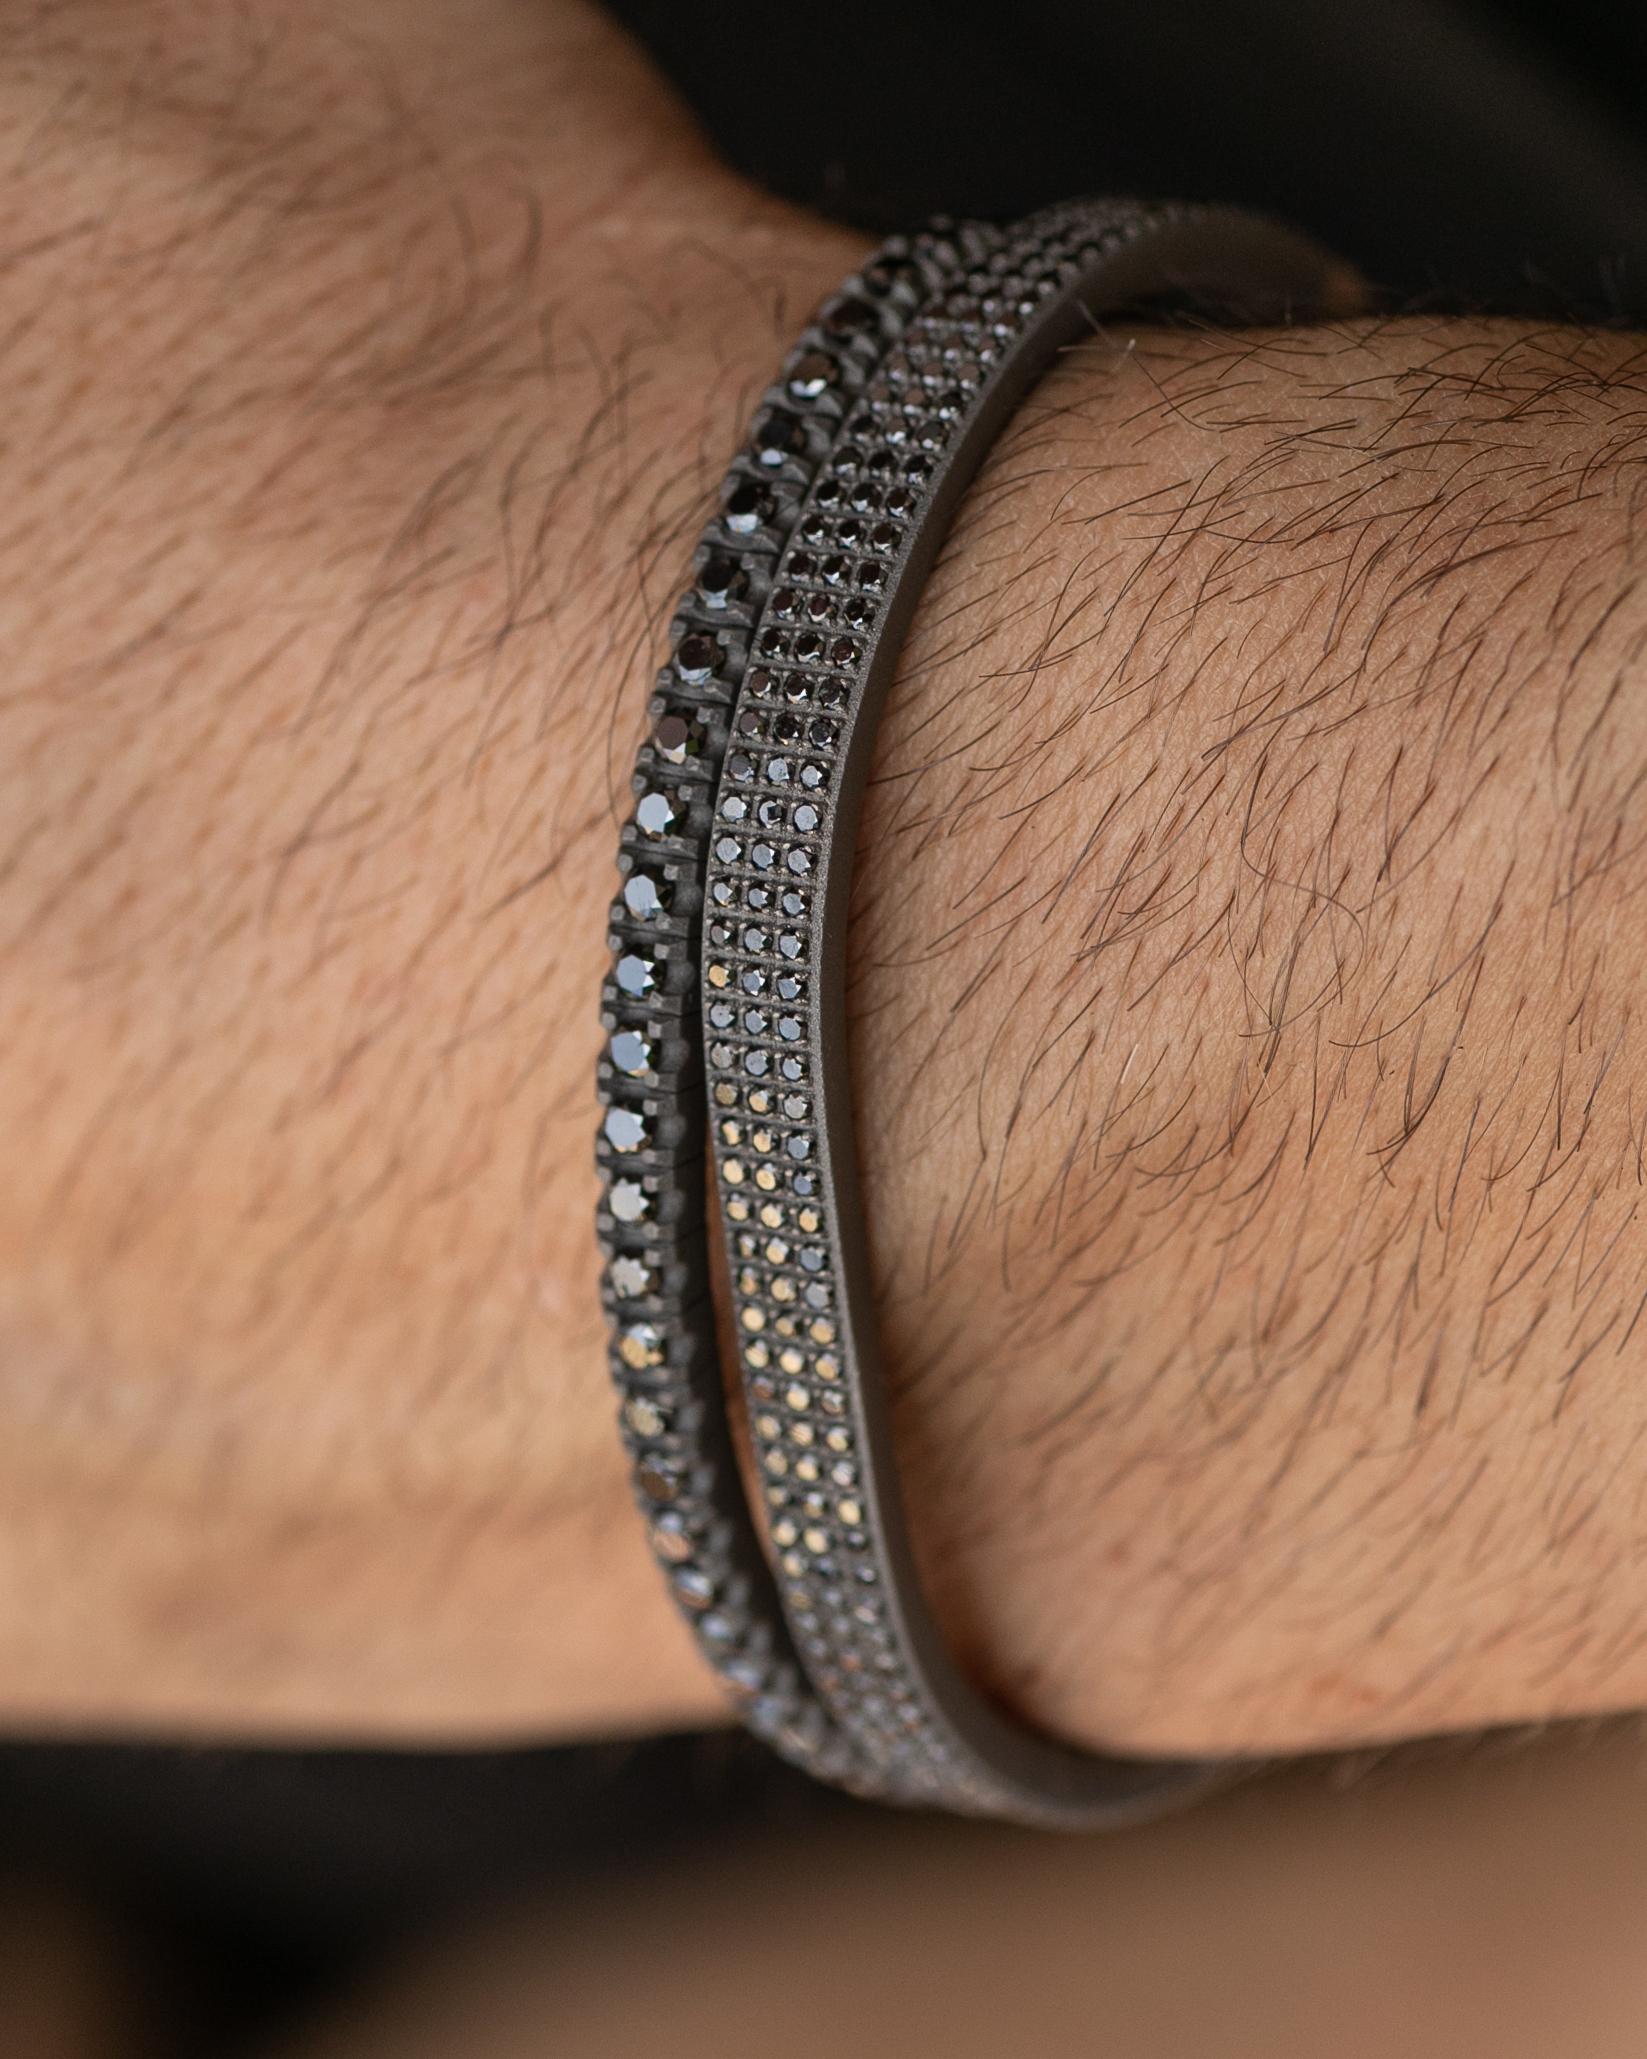 Titanium stylish bracelet is from our Men's Collection. This modern bracelet is decorated with 285 natural black round diamonds in total of 2.85 Carat placed on 18K rose gold detail. The diameter of the bracelet is 7 cm and it is 0.5cm wide. Perfect